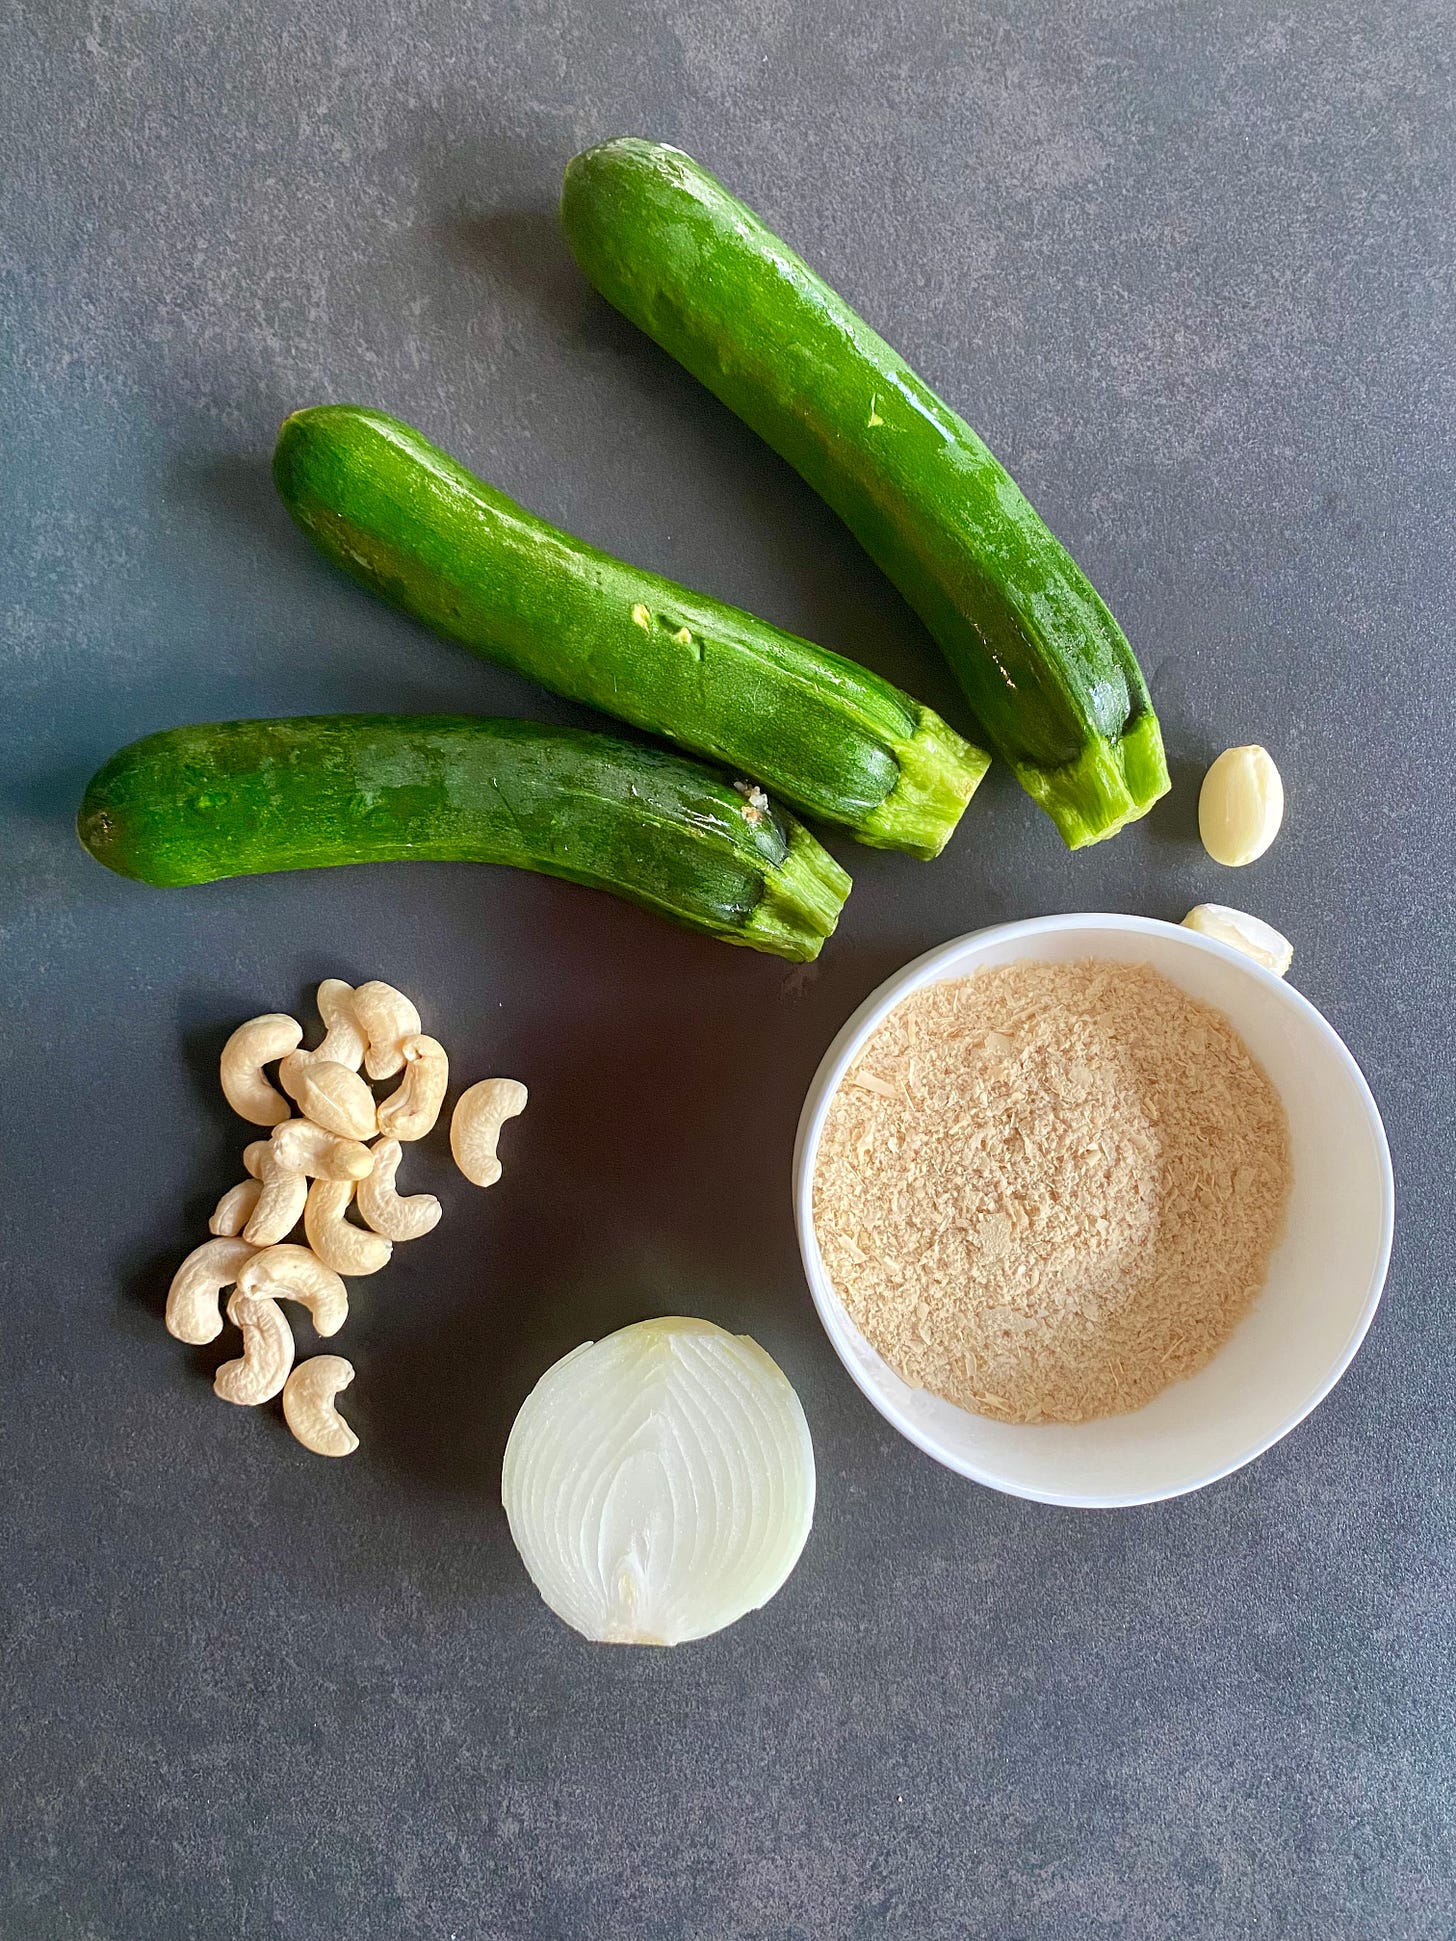 Zucchini, garlic, onion, nutritional yeasts, cashew nuts, ingredients for a soup